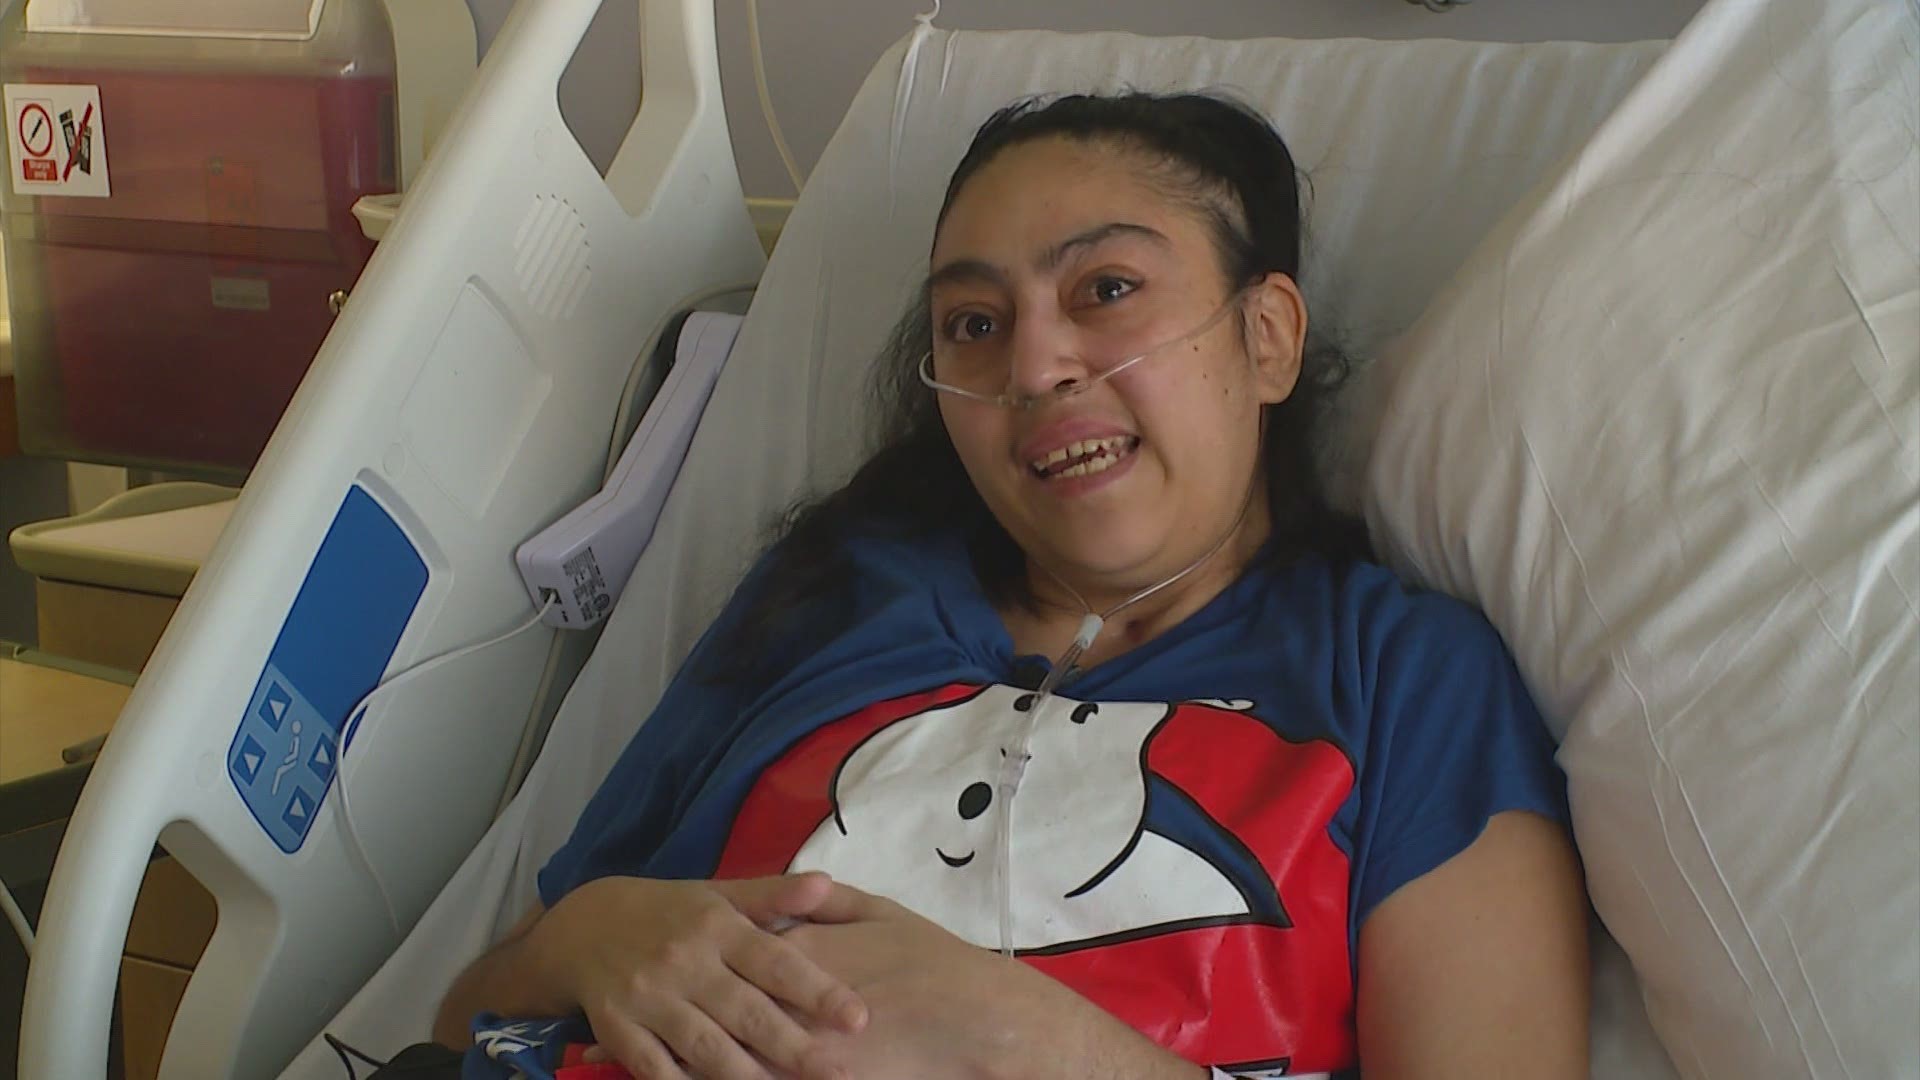 Hospital staff cheered as Jenny Aguilar, 32, a mother of five, walked out on her own, Tuesday. Doctors went to extraordinary lengths to save her life.